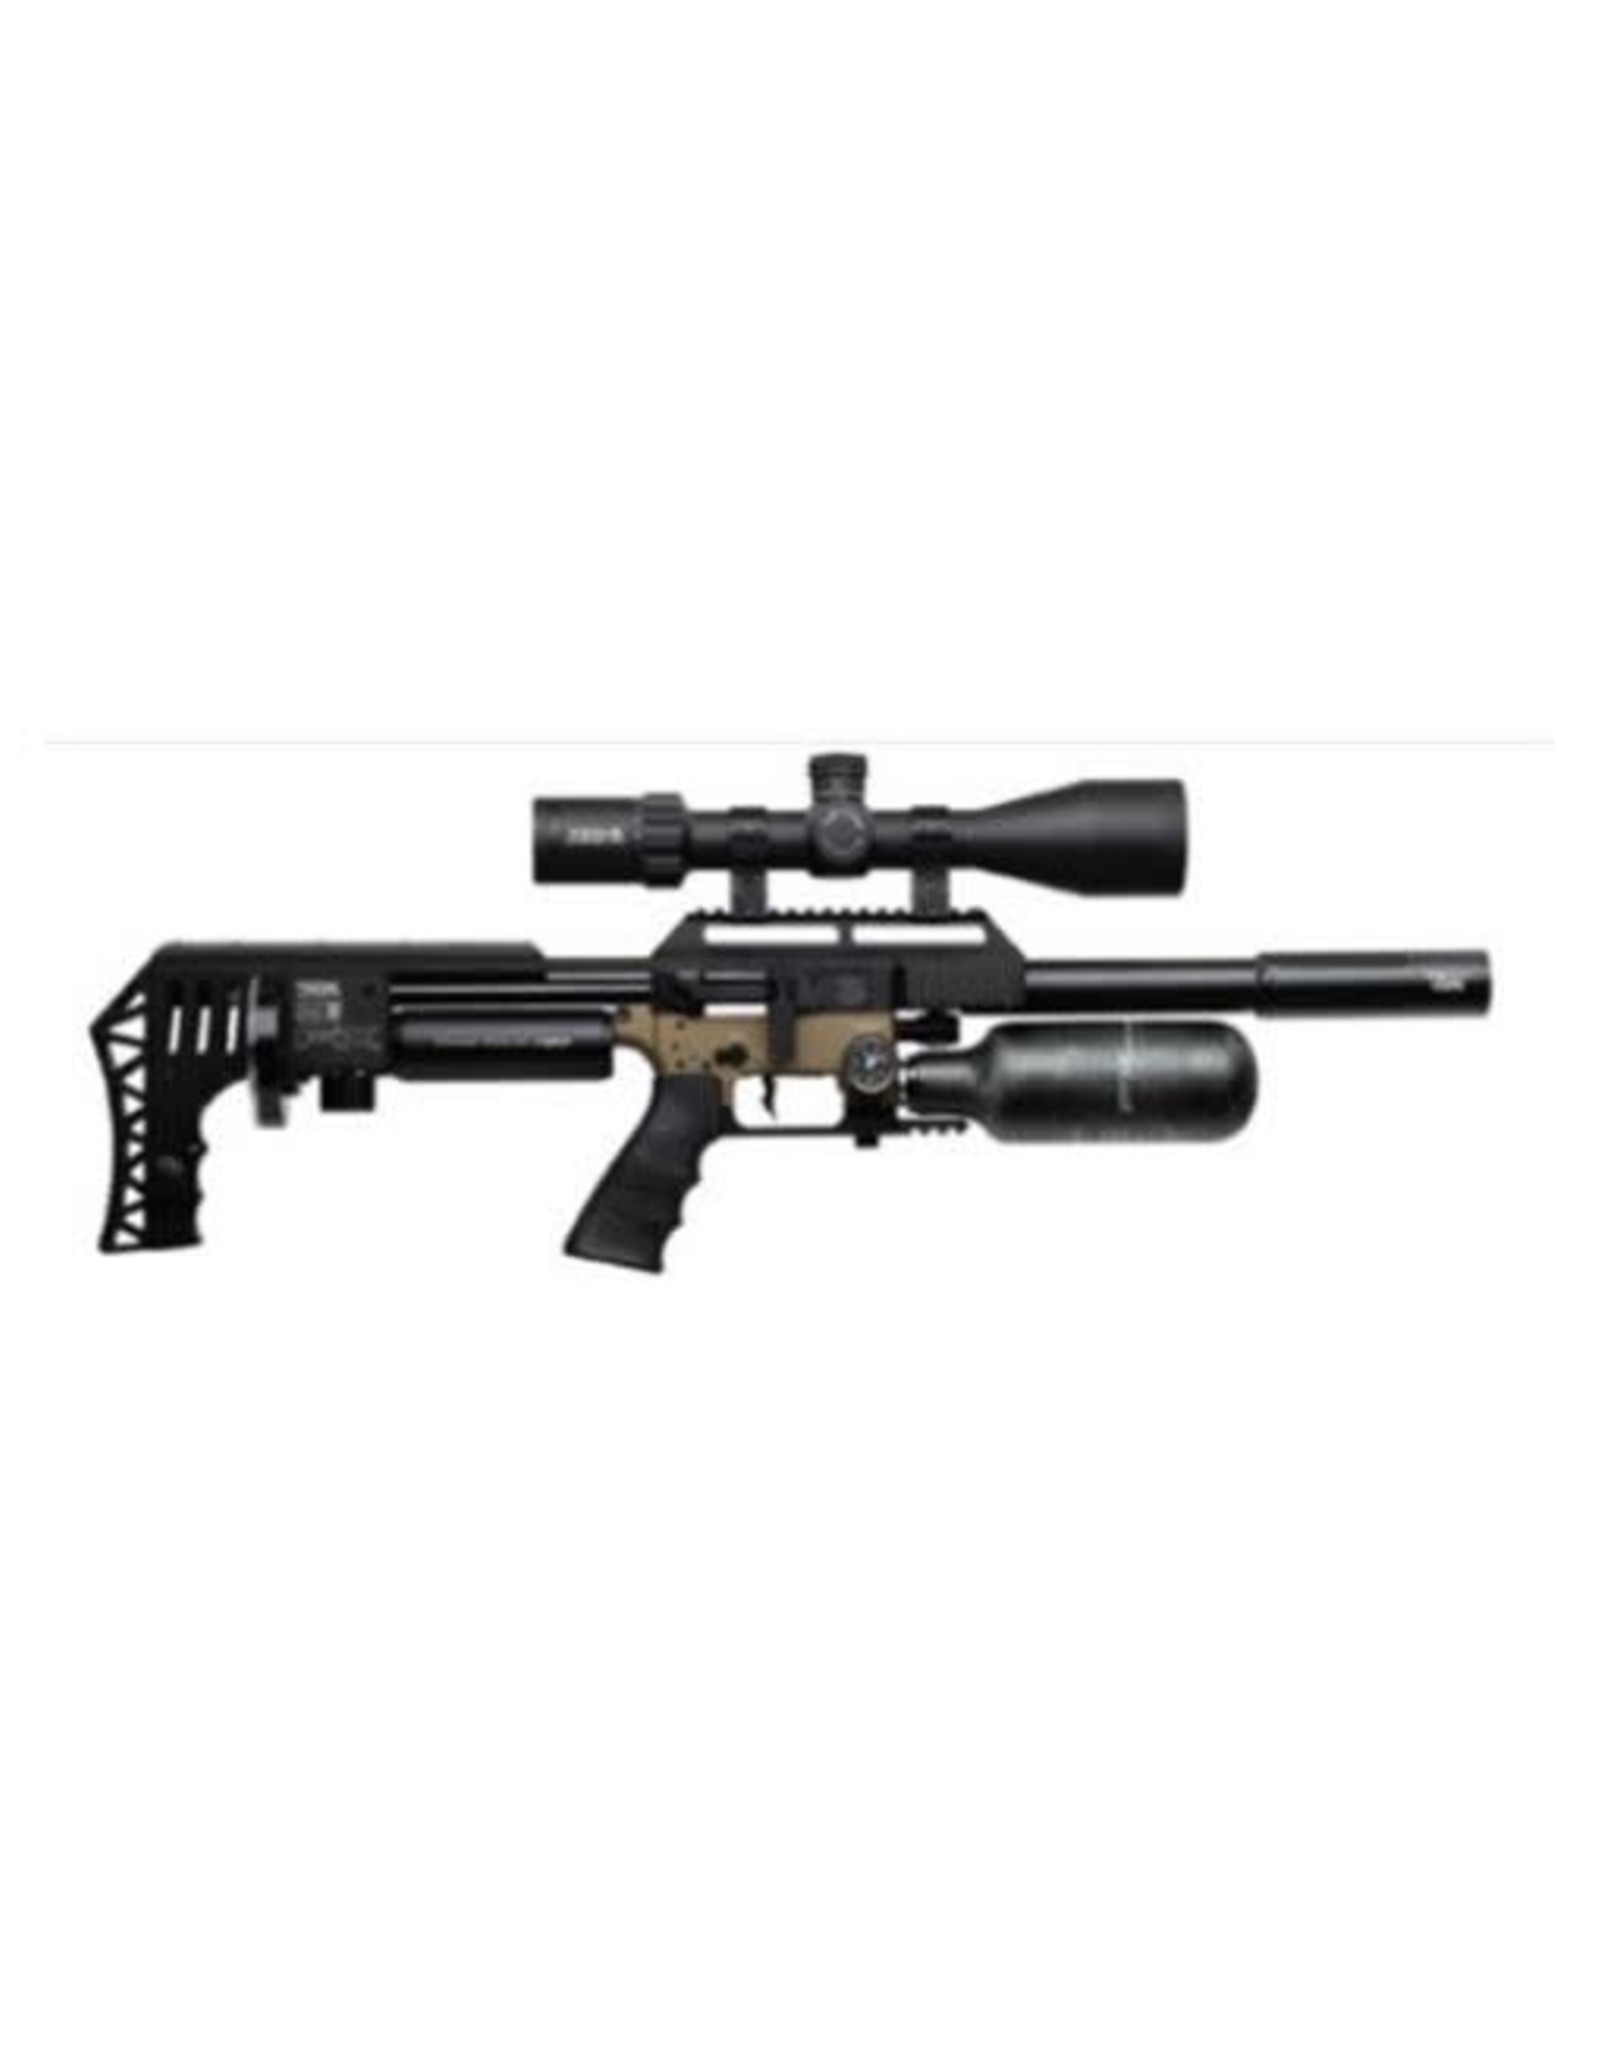 FX Airguns .22 (5.5mm) Cal. FX Impact M3 Compact Air Rifle with 500mm Barrel | DonnyFL Moderator - 38 Round Side Shot Magazine